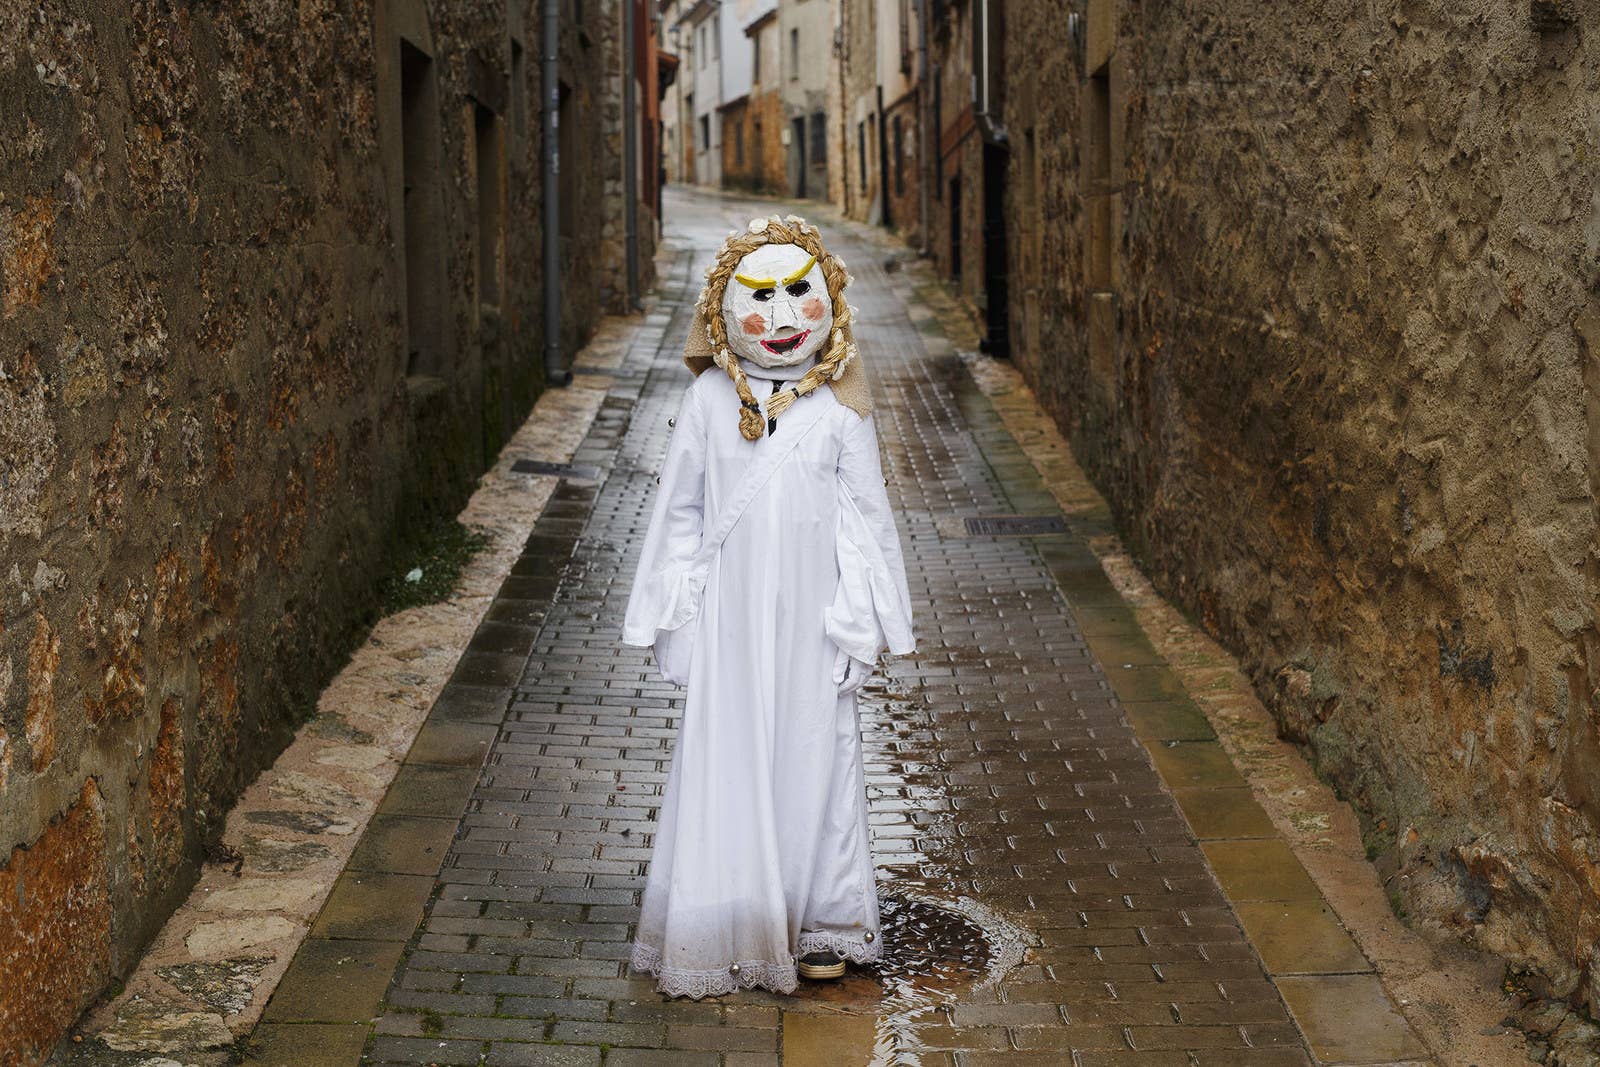 A reveler dressed as a child poses for pictures during El Gallo de Carnaval, or the Rooster Carnival, on Feb. 11 in Mecerreyes, Spain. During the Carnavaladas y Zarramacadas, people take to the streets in costumes made with ropes, bones, skins, scraps of cloth, oak leaves, and other rural items.